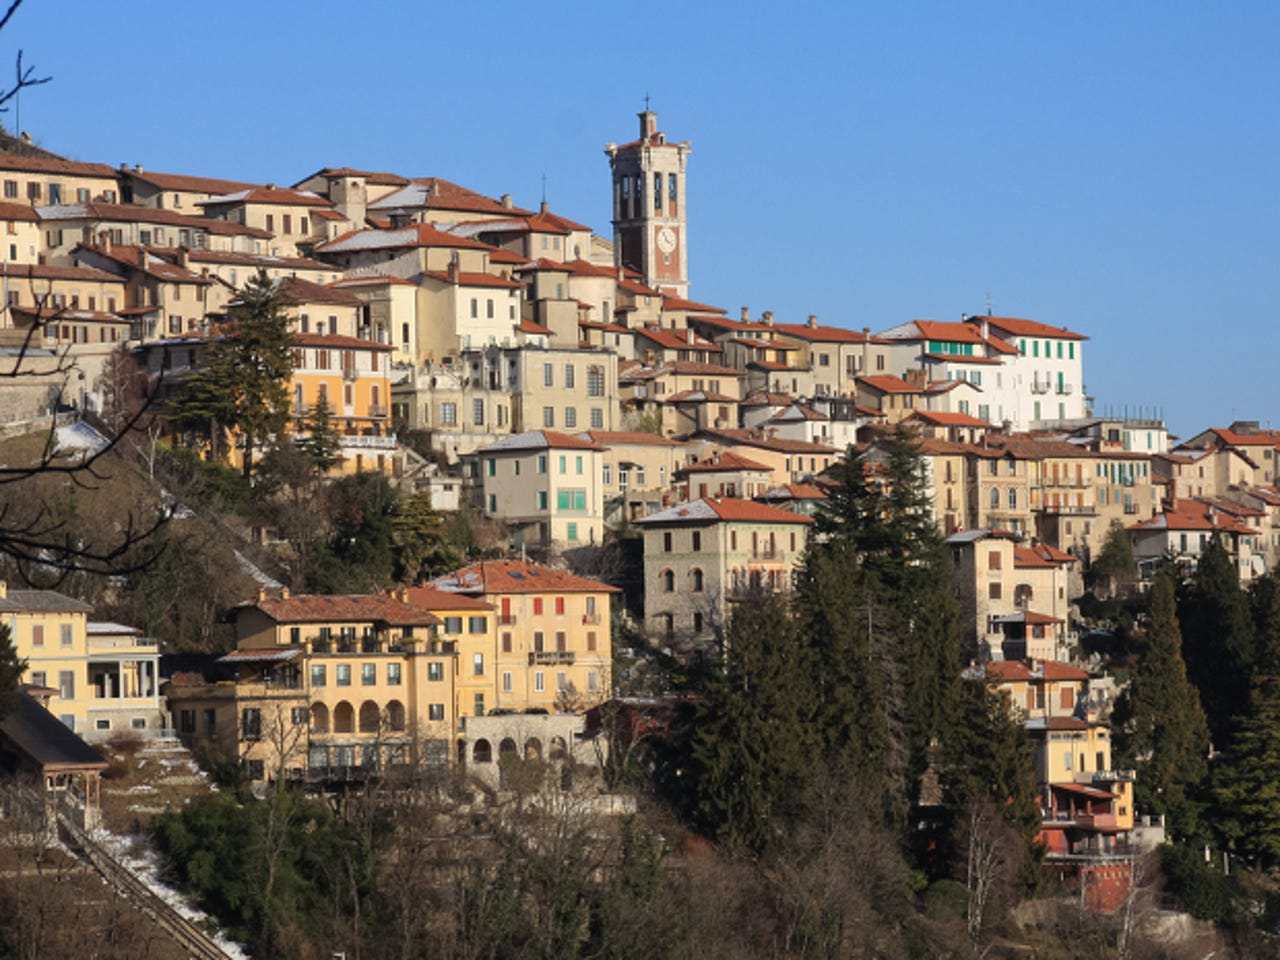 Sacro Monte di Varese, the symbol of the city of Varese